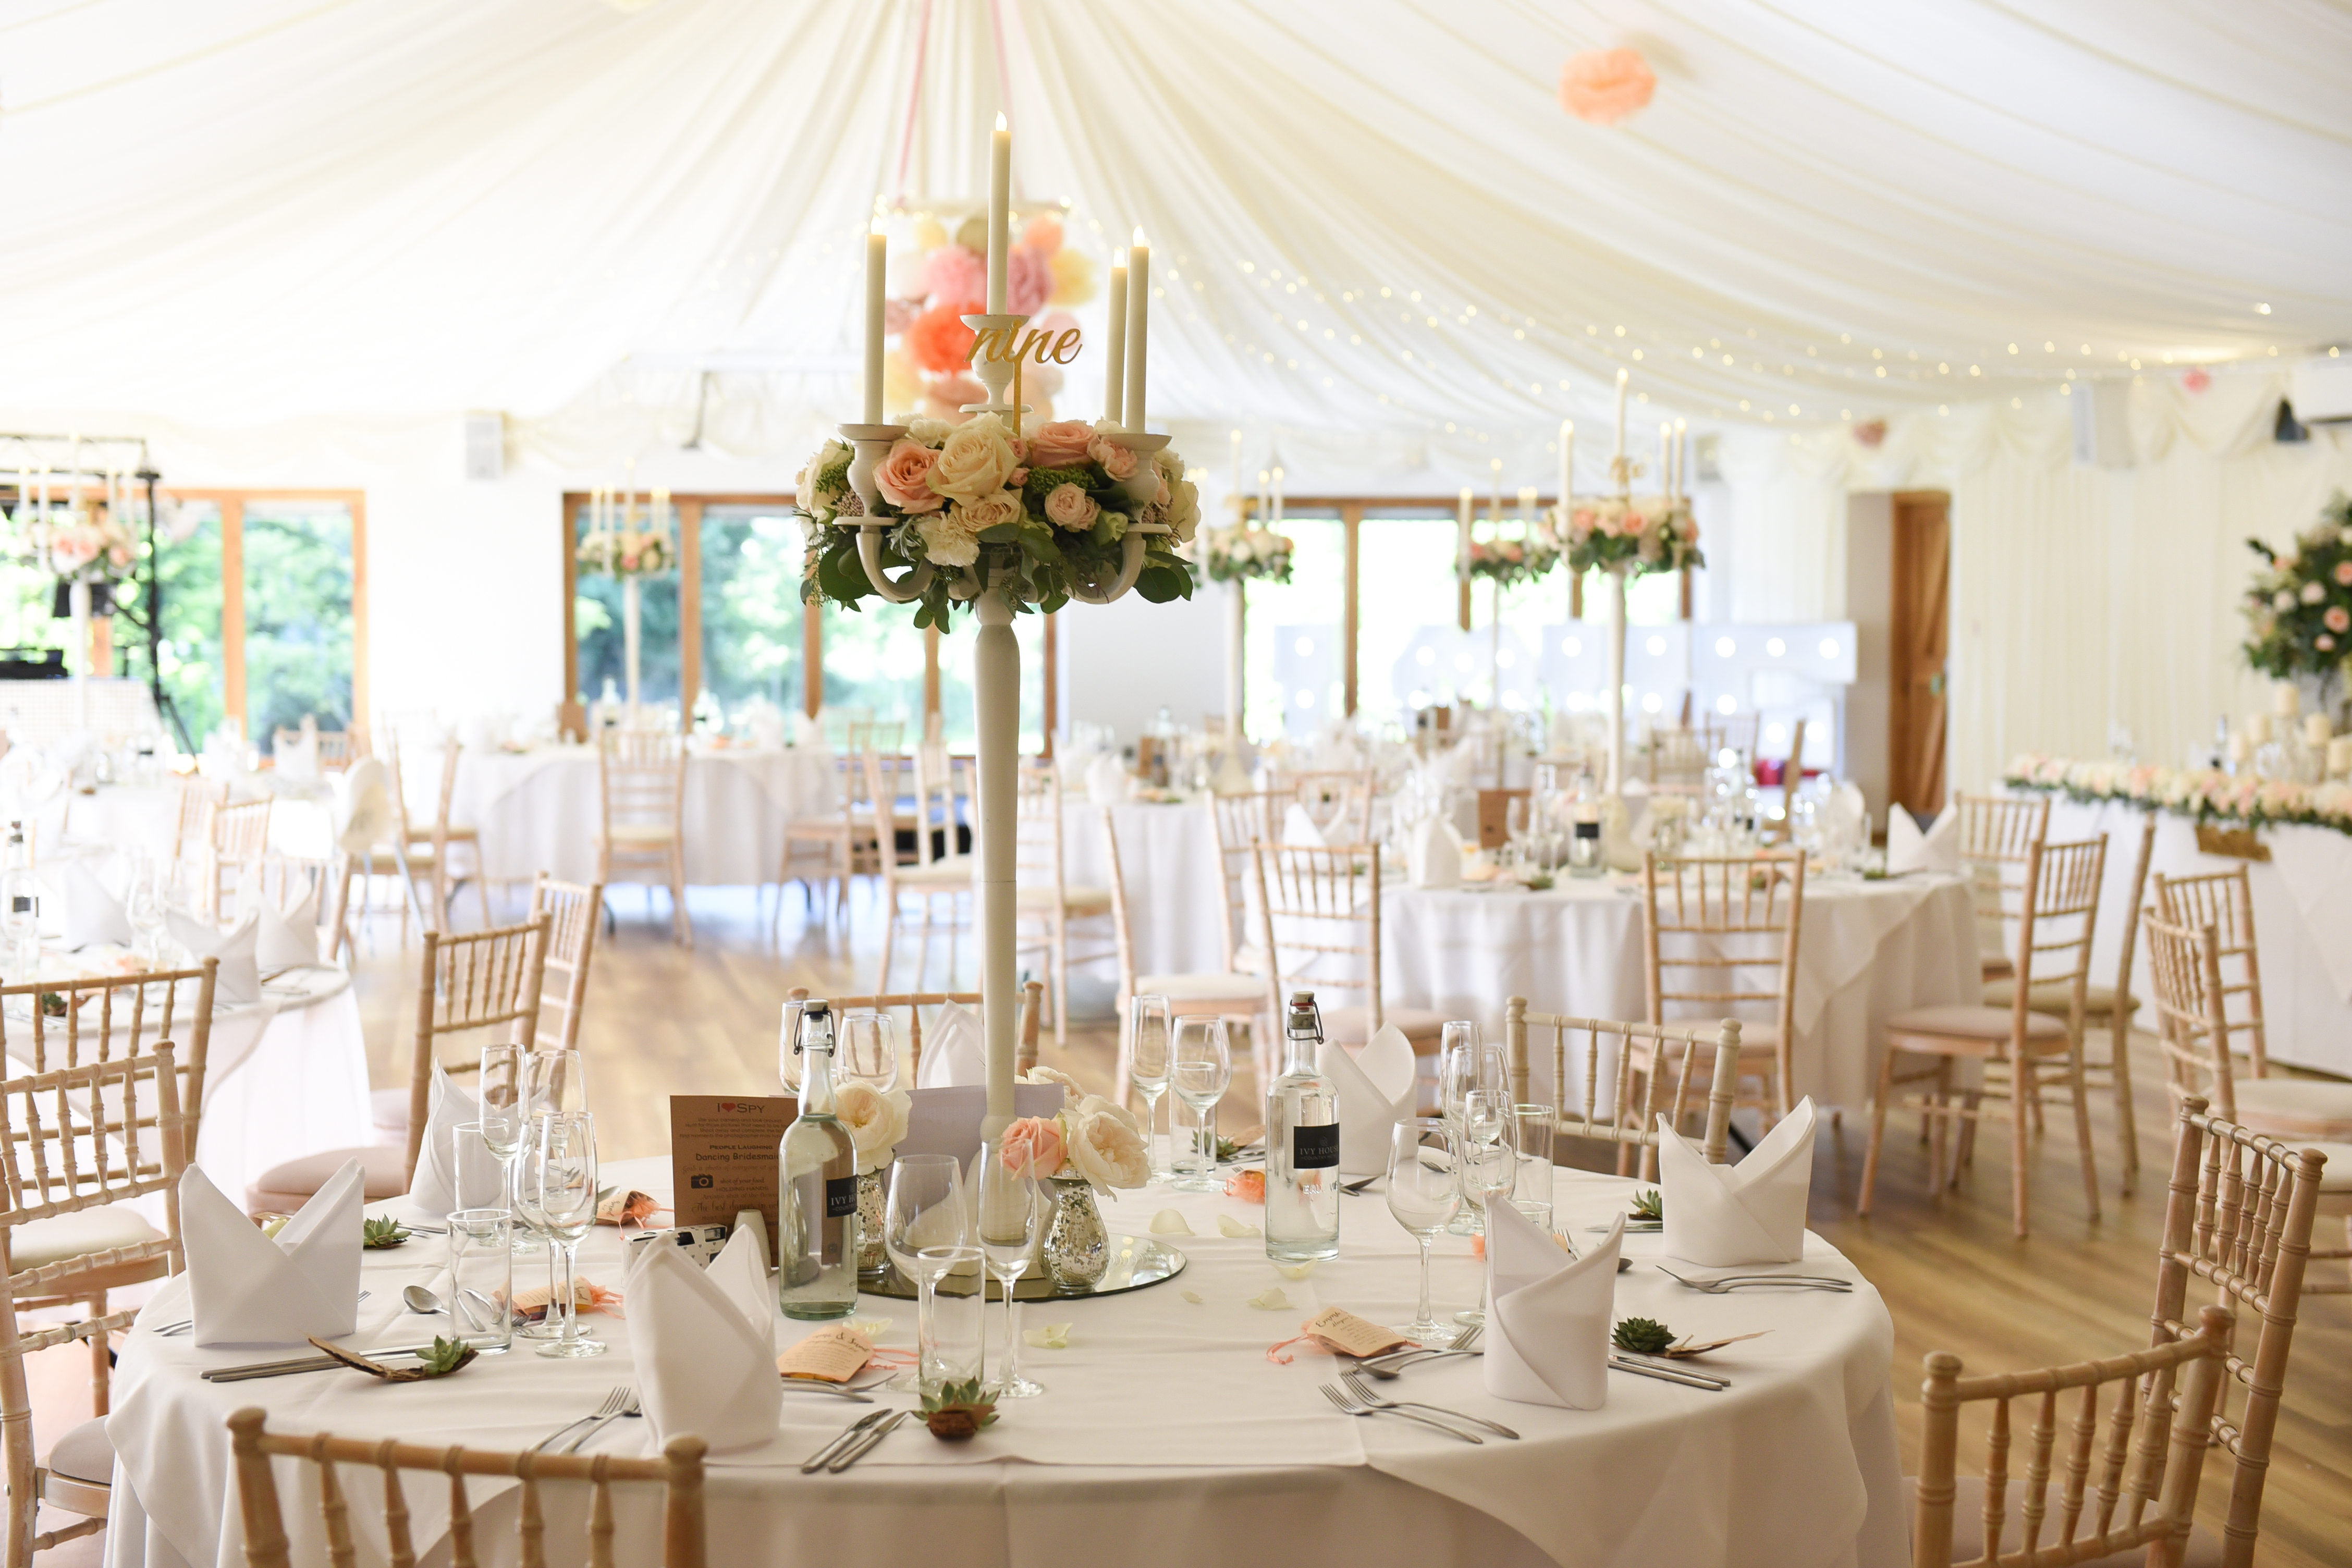 Wedding Guest Tables Decorated With White and Pink Roses and Candles at Ivy House Country Hotel